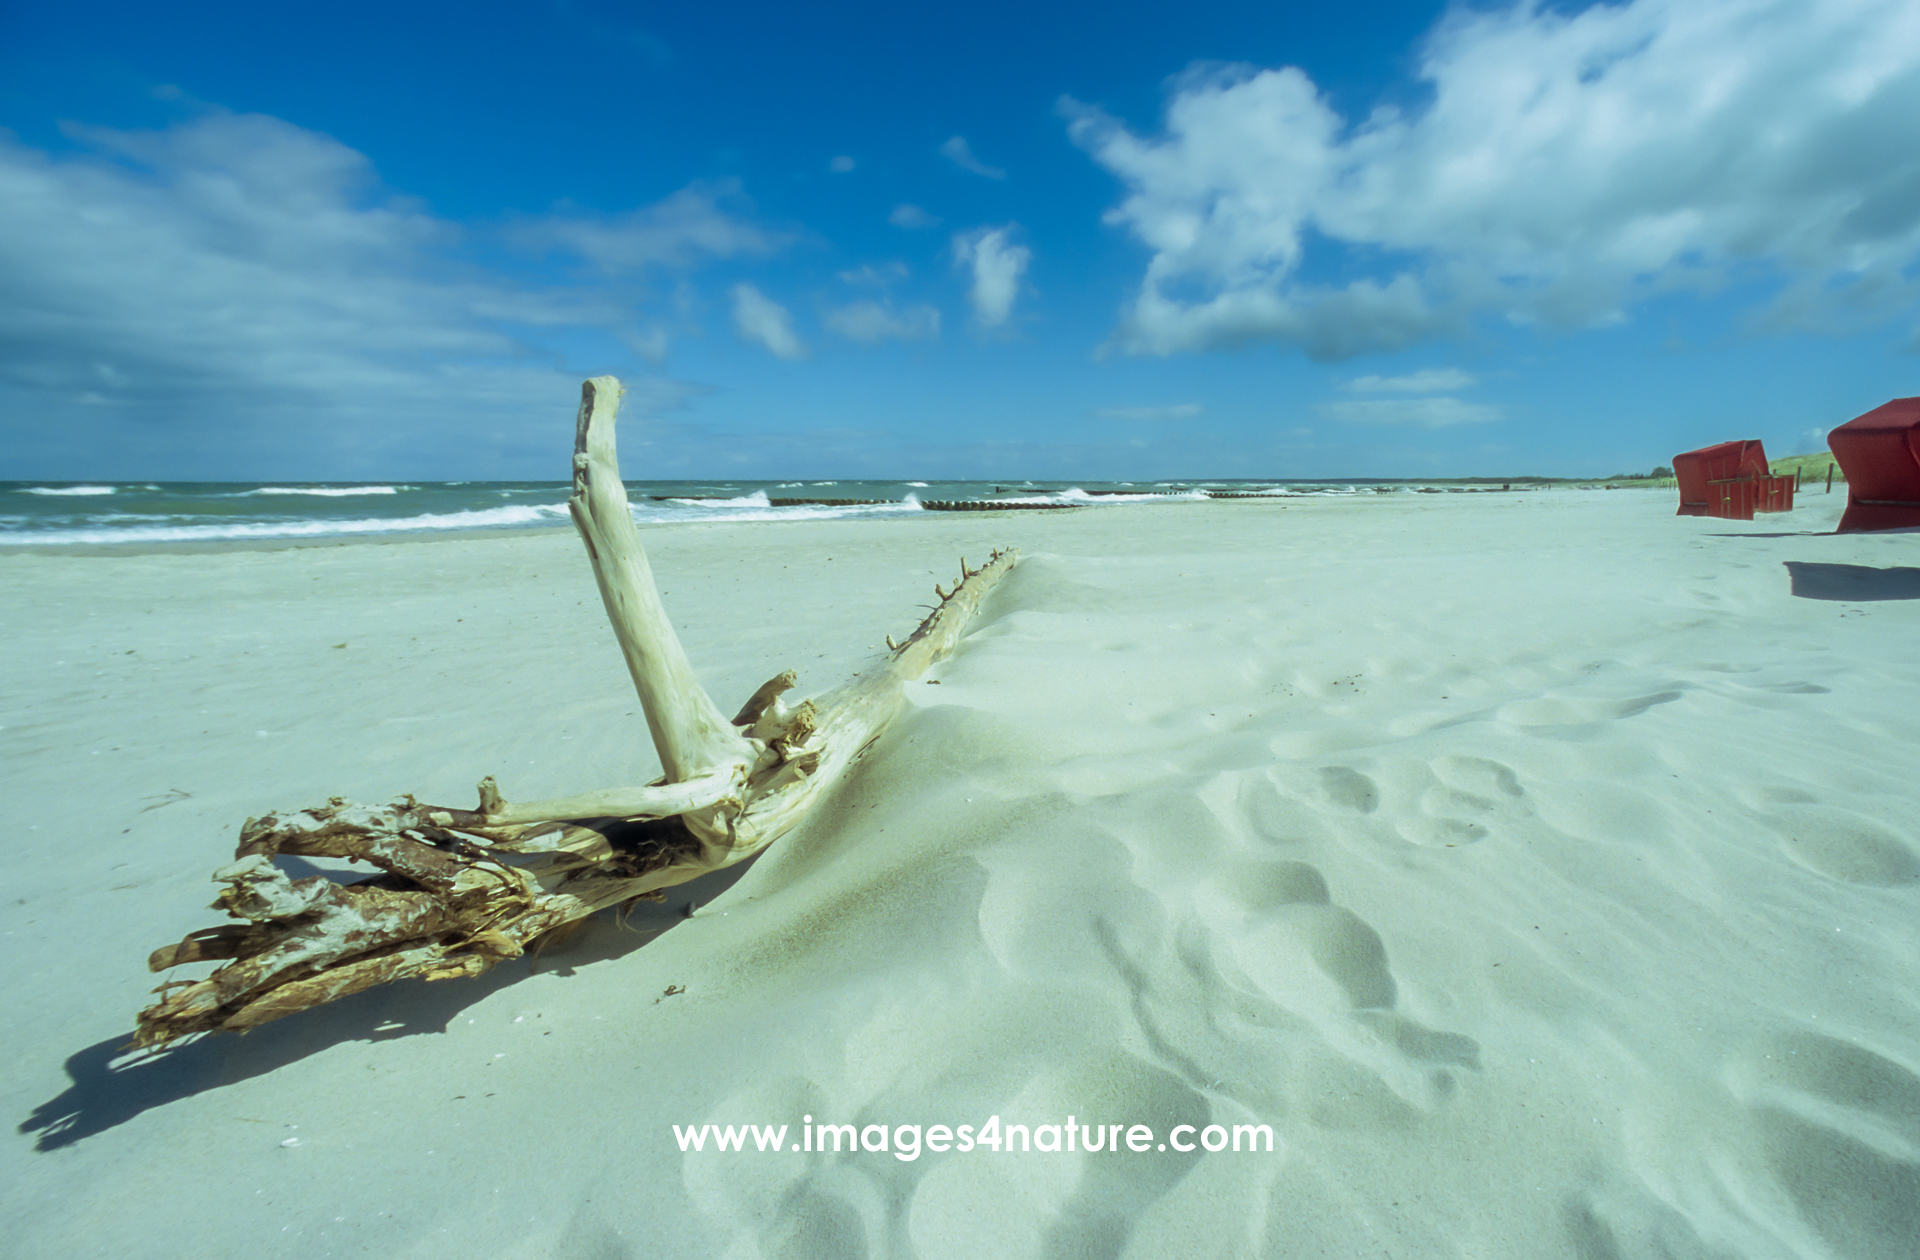 A piece of driftwood on a sandy beach with basket chairs in the background